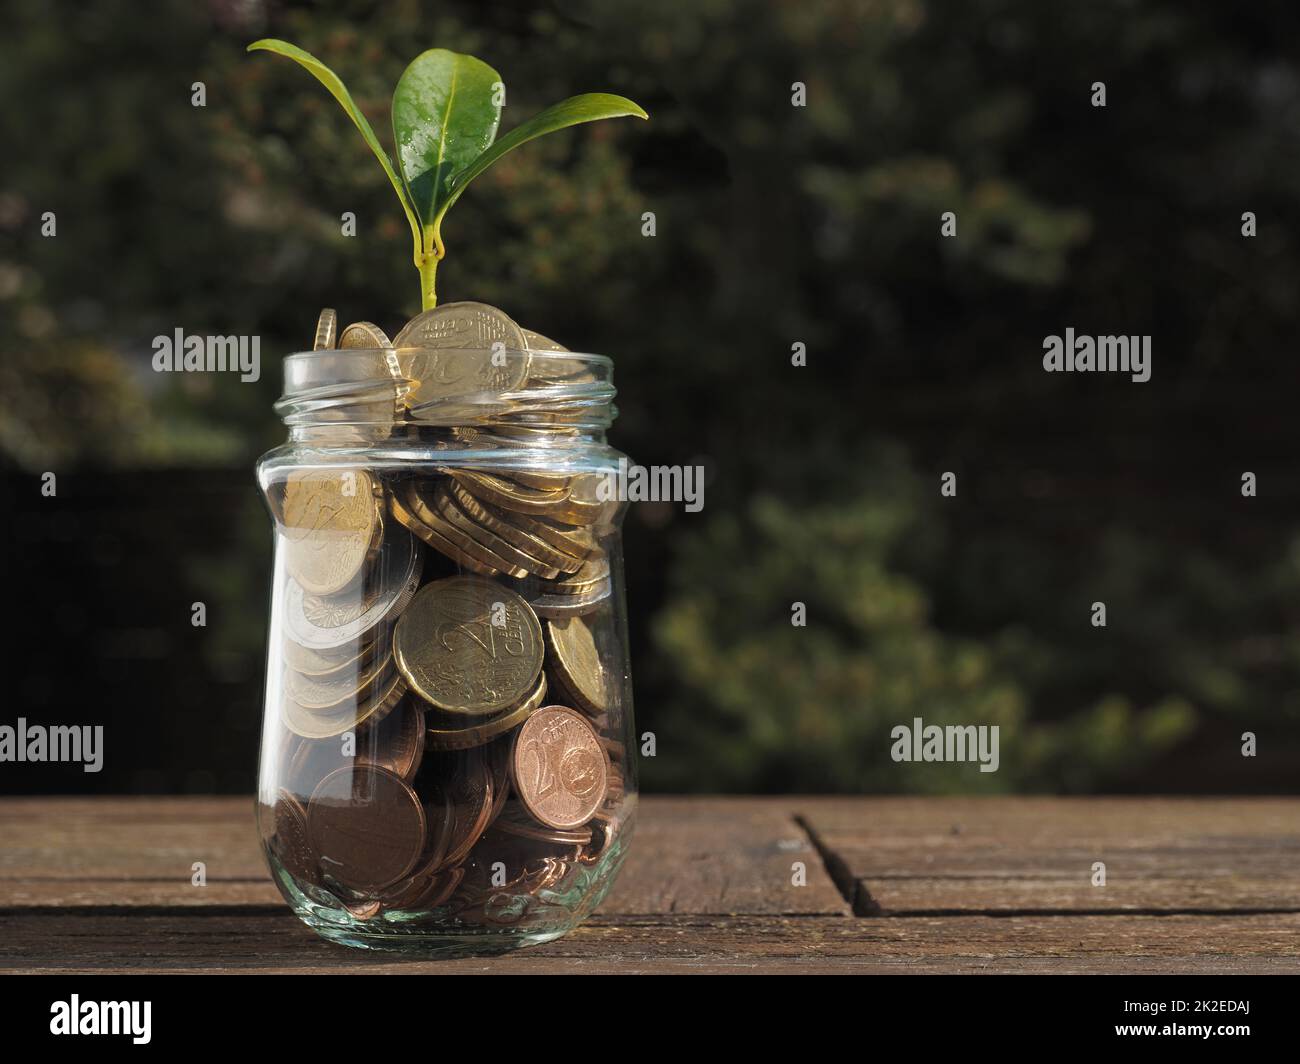 Growth concept, plant shoot grows from a jar filled with cash Stock Photo